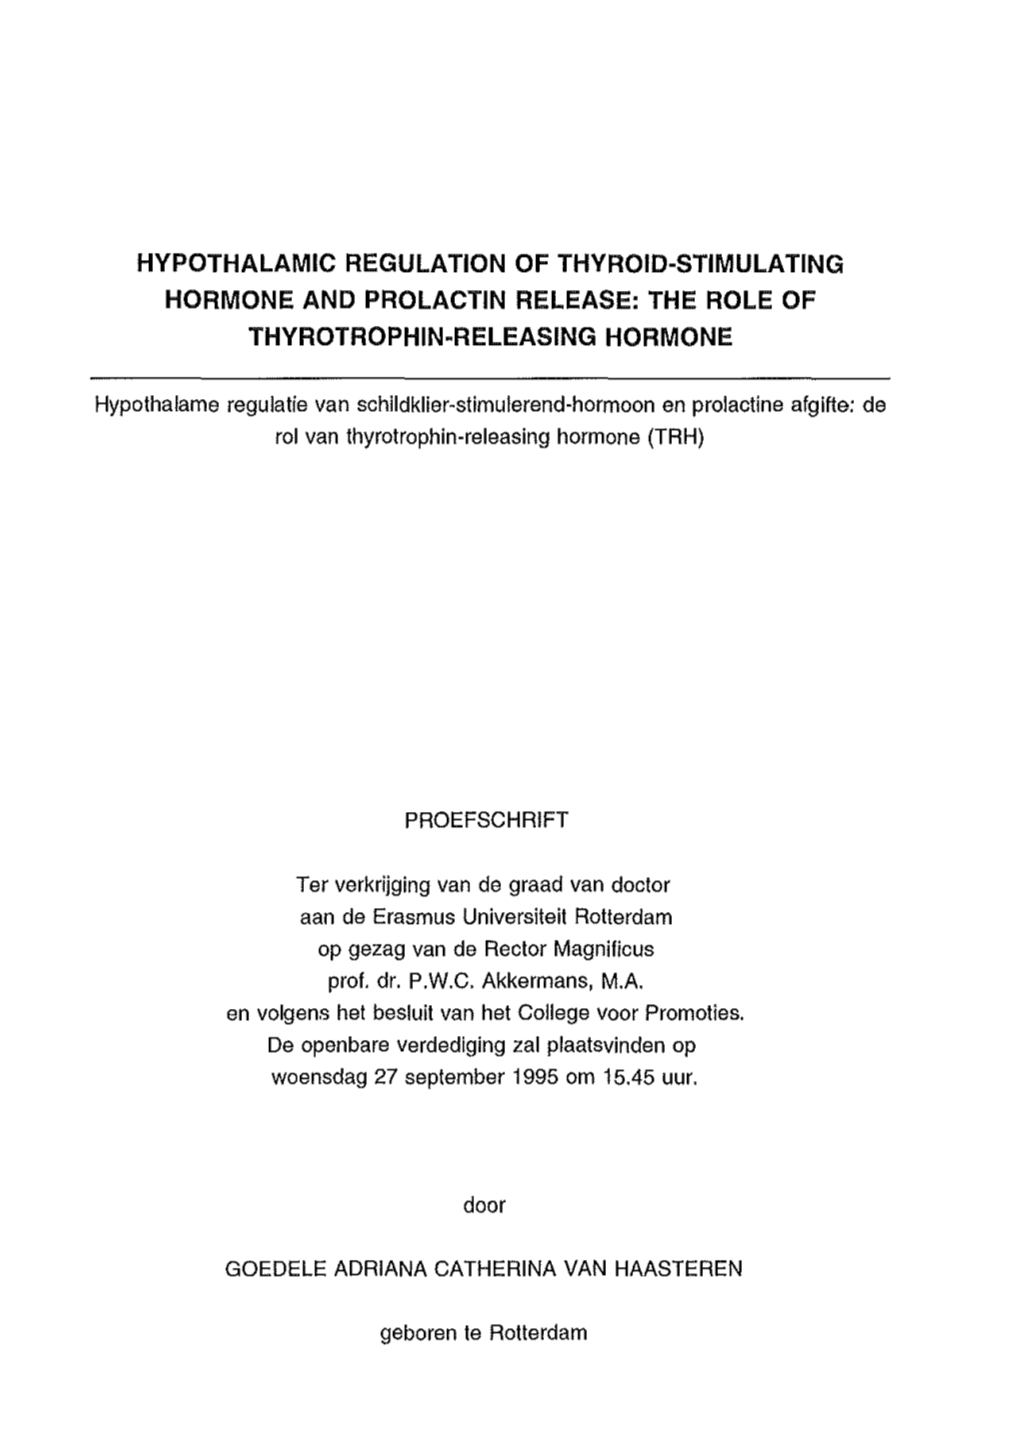 Hypothalamic Regulation of Thyroid-Stimulating Hormone and Prolactin Release: the Role of Thyrotrophin-Releasing Hormone